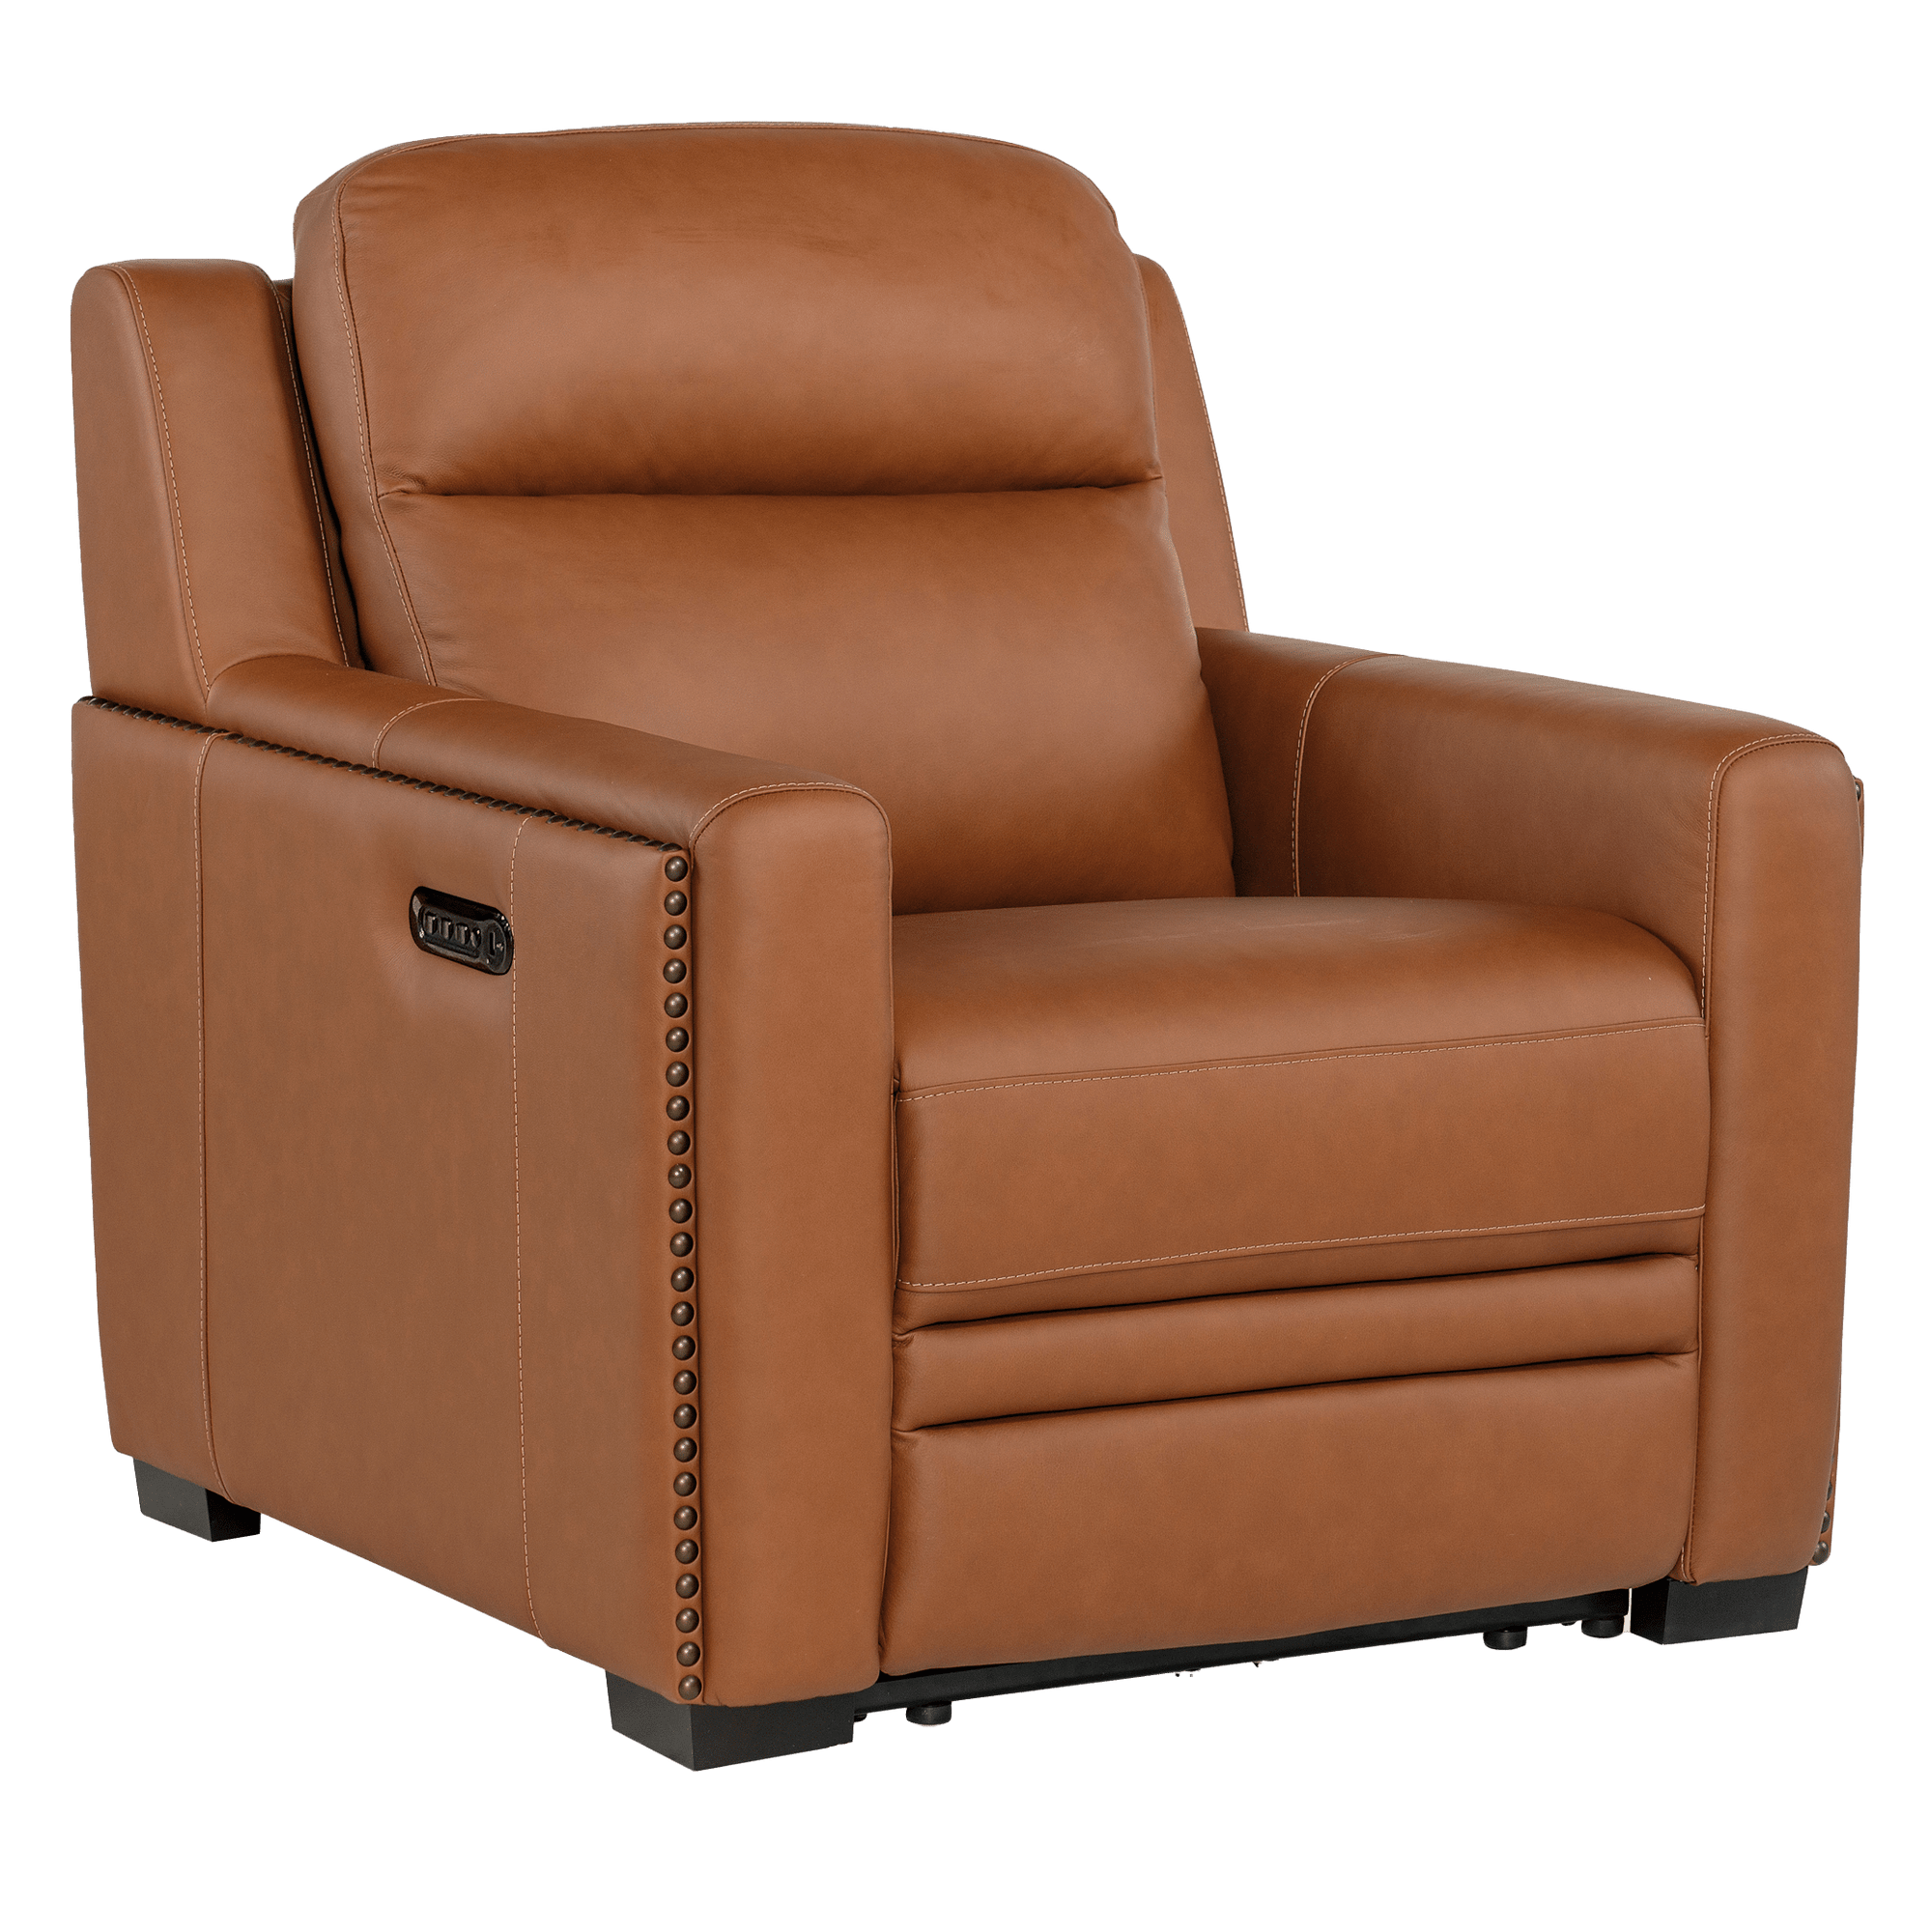 Marillis Power Recliner with Articulating Headrest and Lumbar Support, Leather - Coja